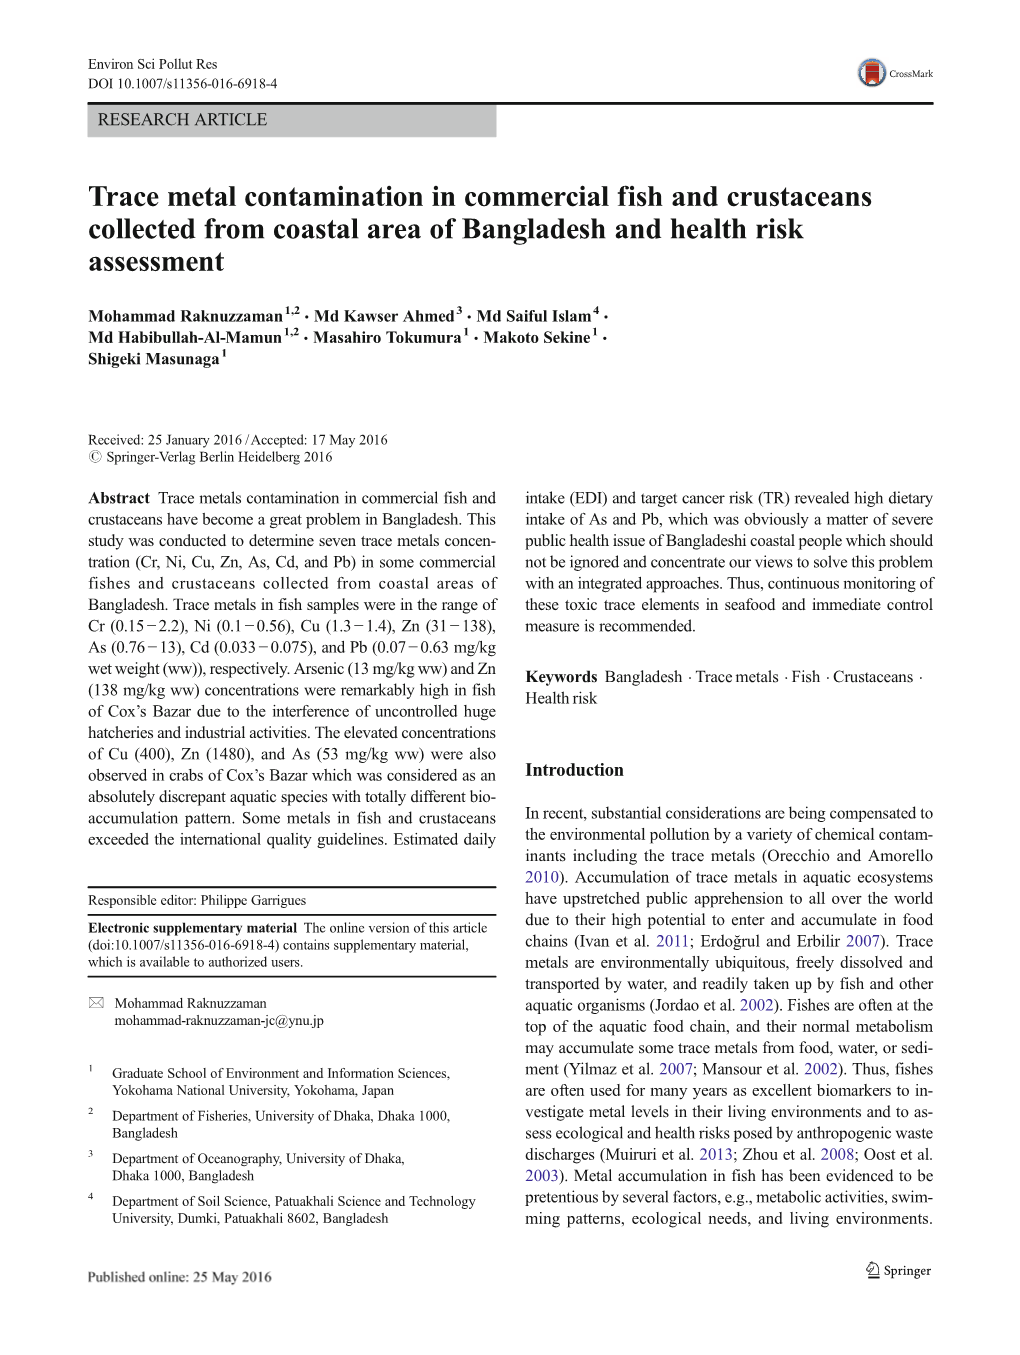 Trace Metal Contamination in Commercial Fish and Crustaceans Collected from Coastal Area of Bangladesh and Health Risk Assessment